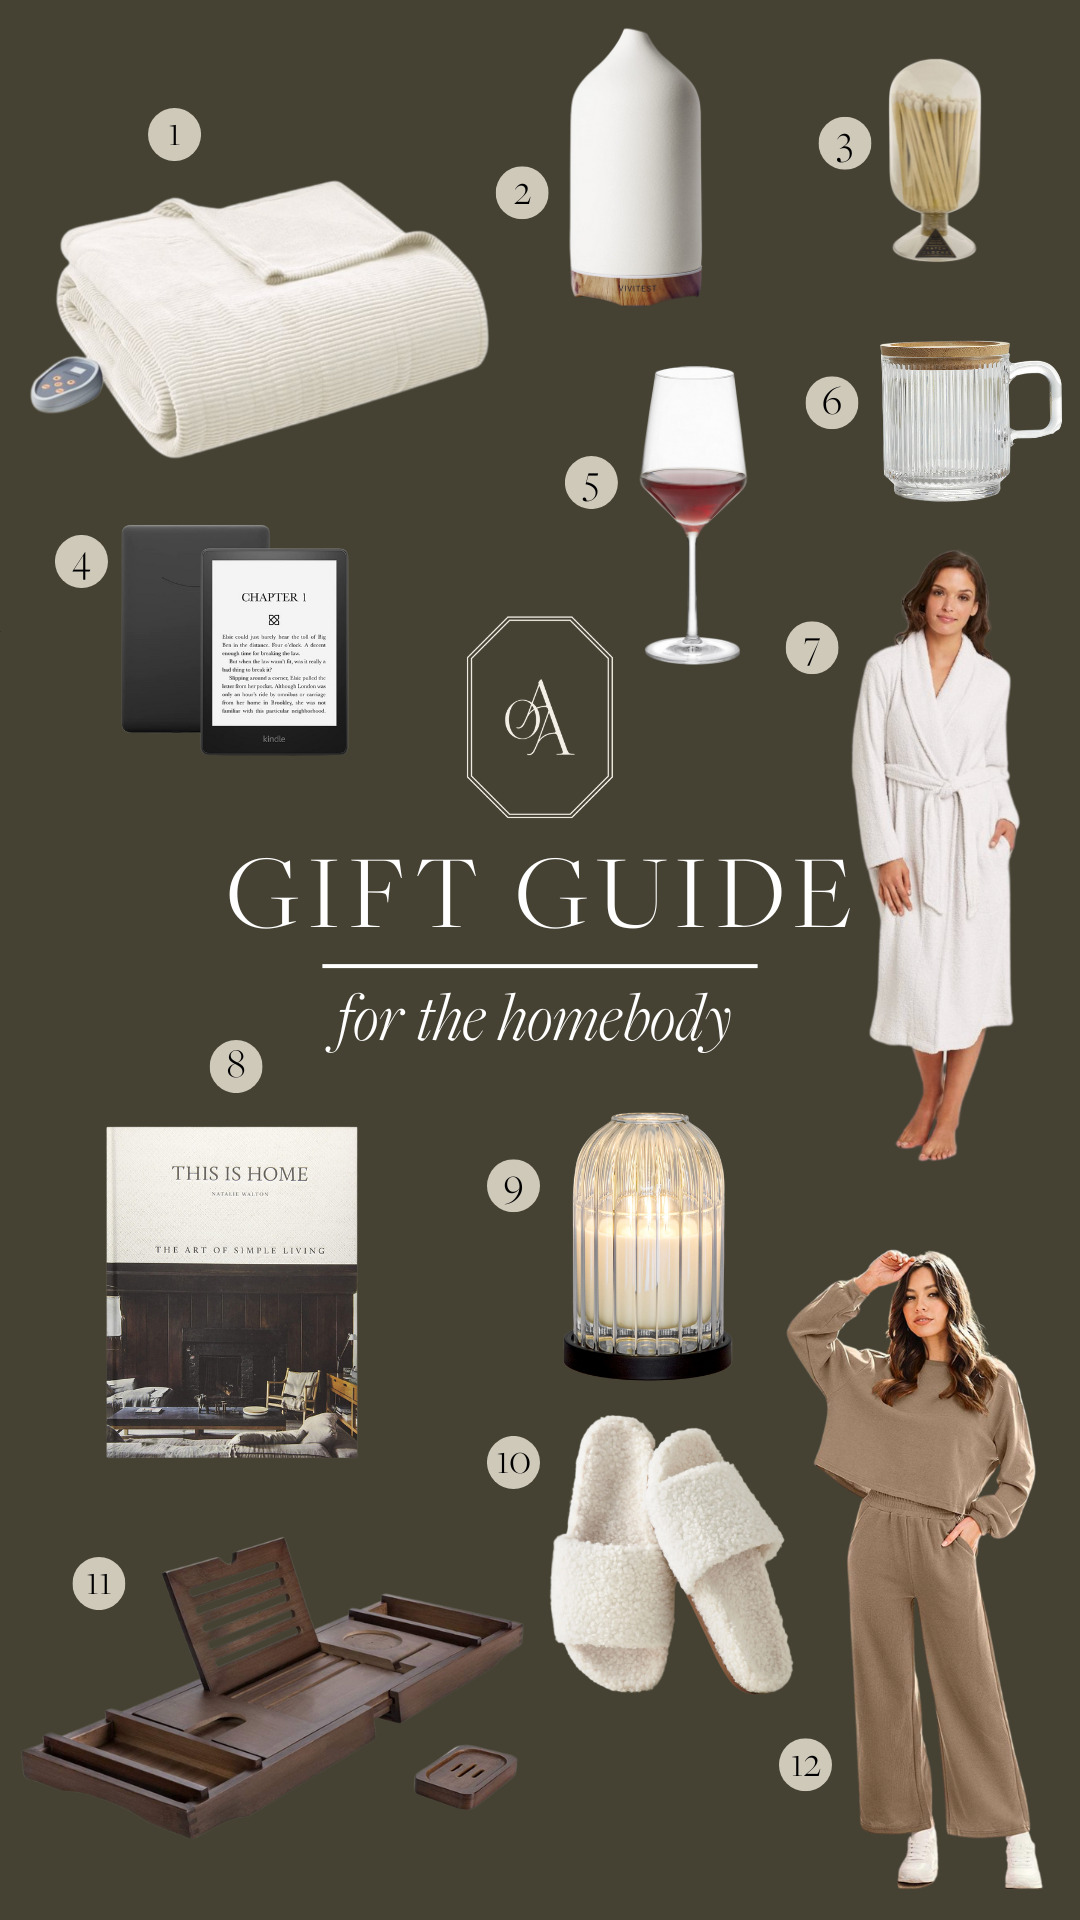 12 gift ideas for a homebody